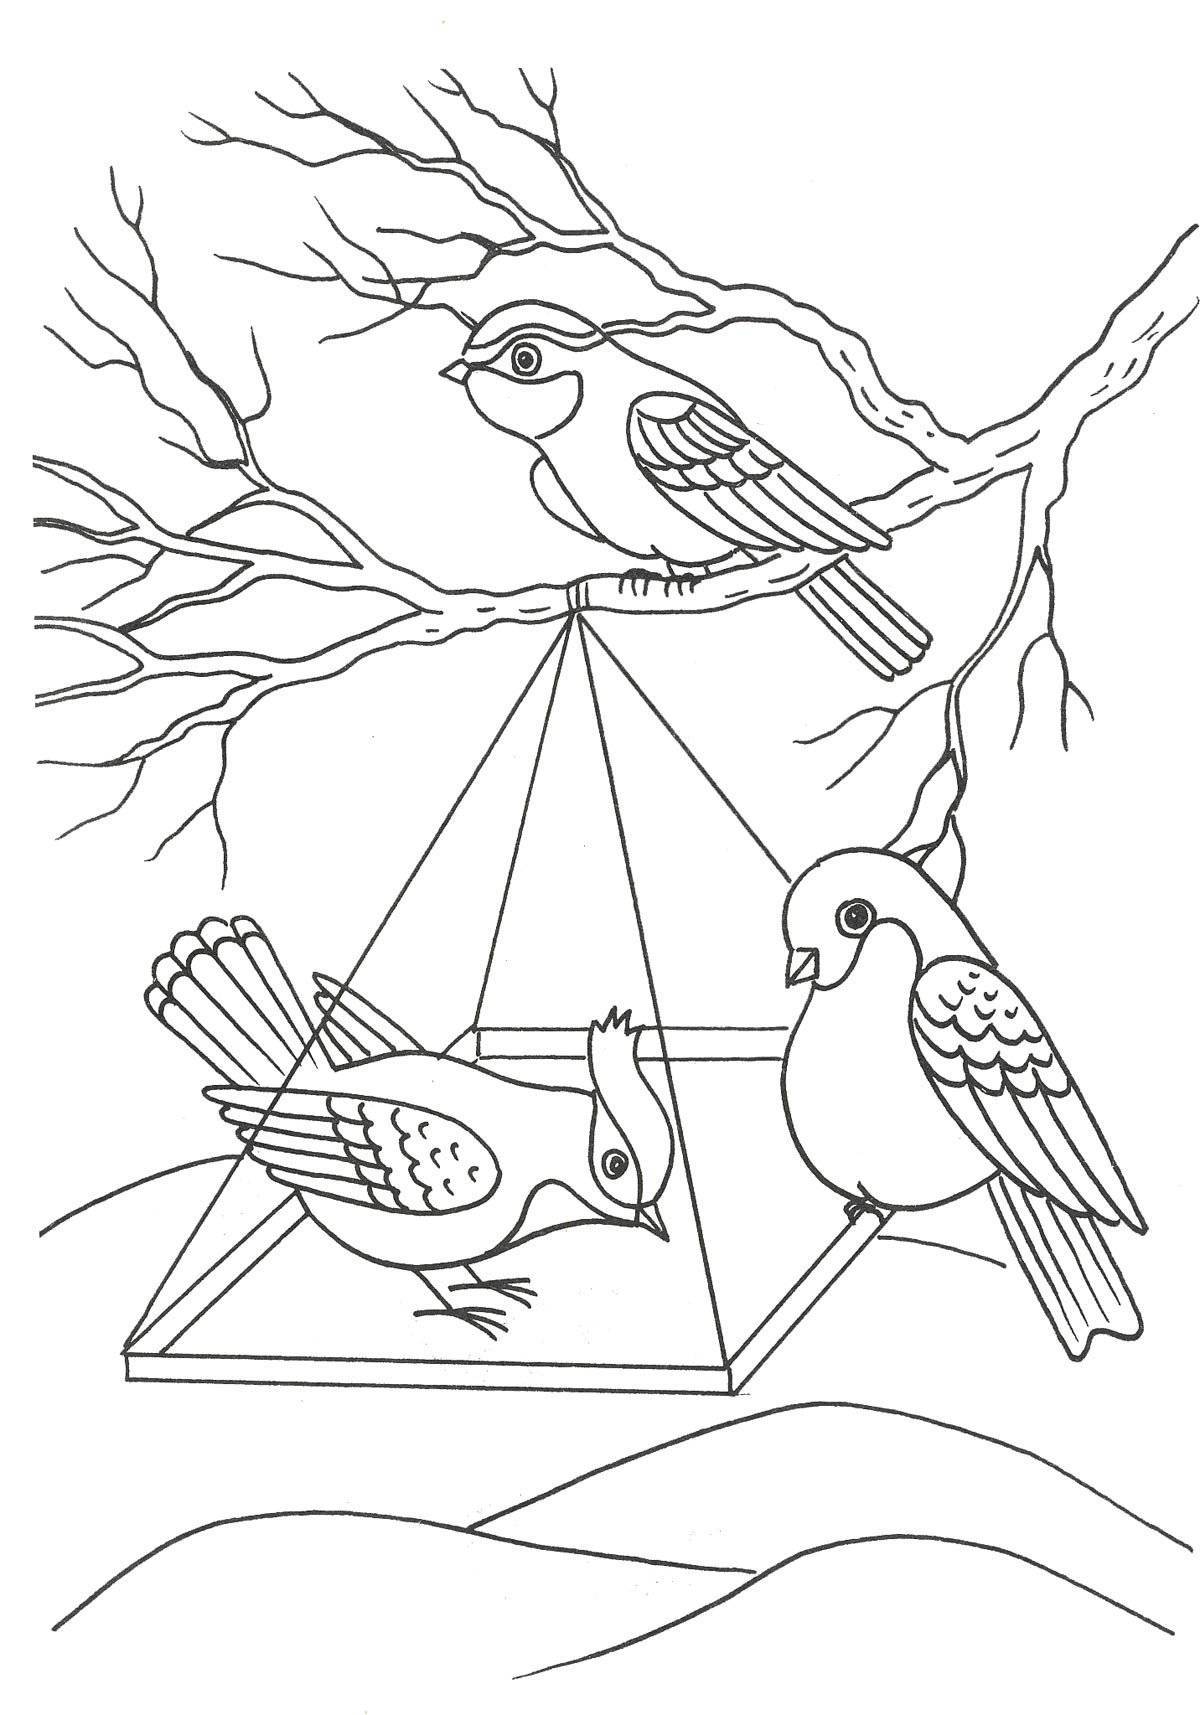 Cute feeder coloring page